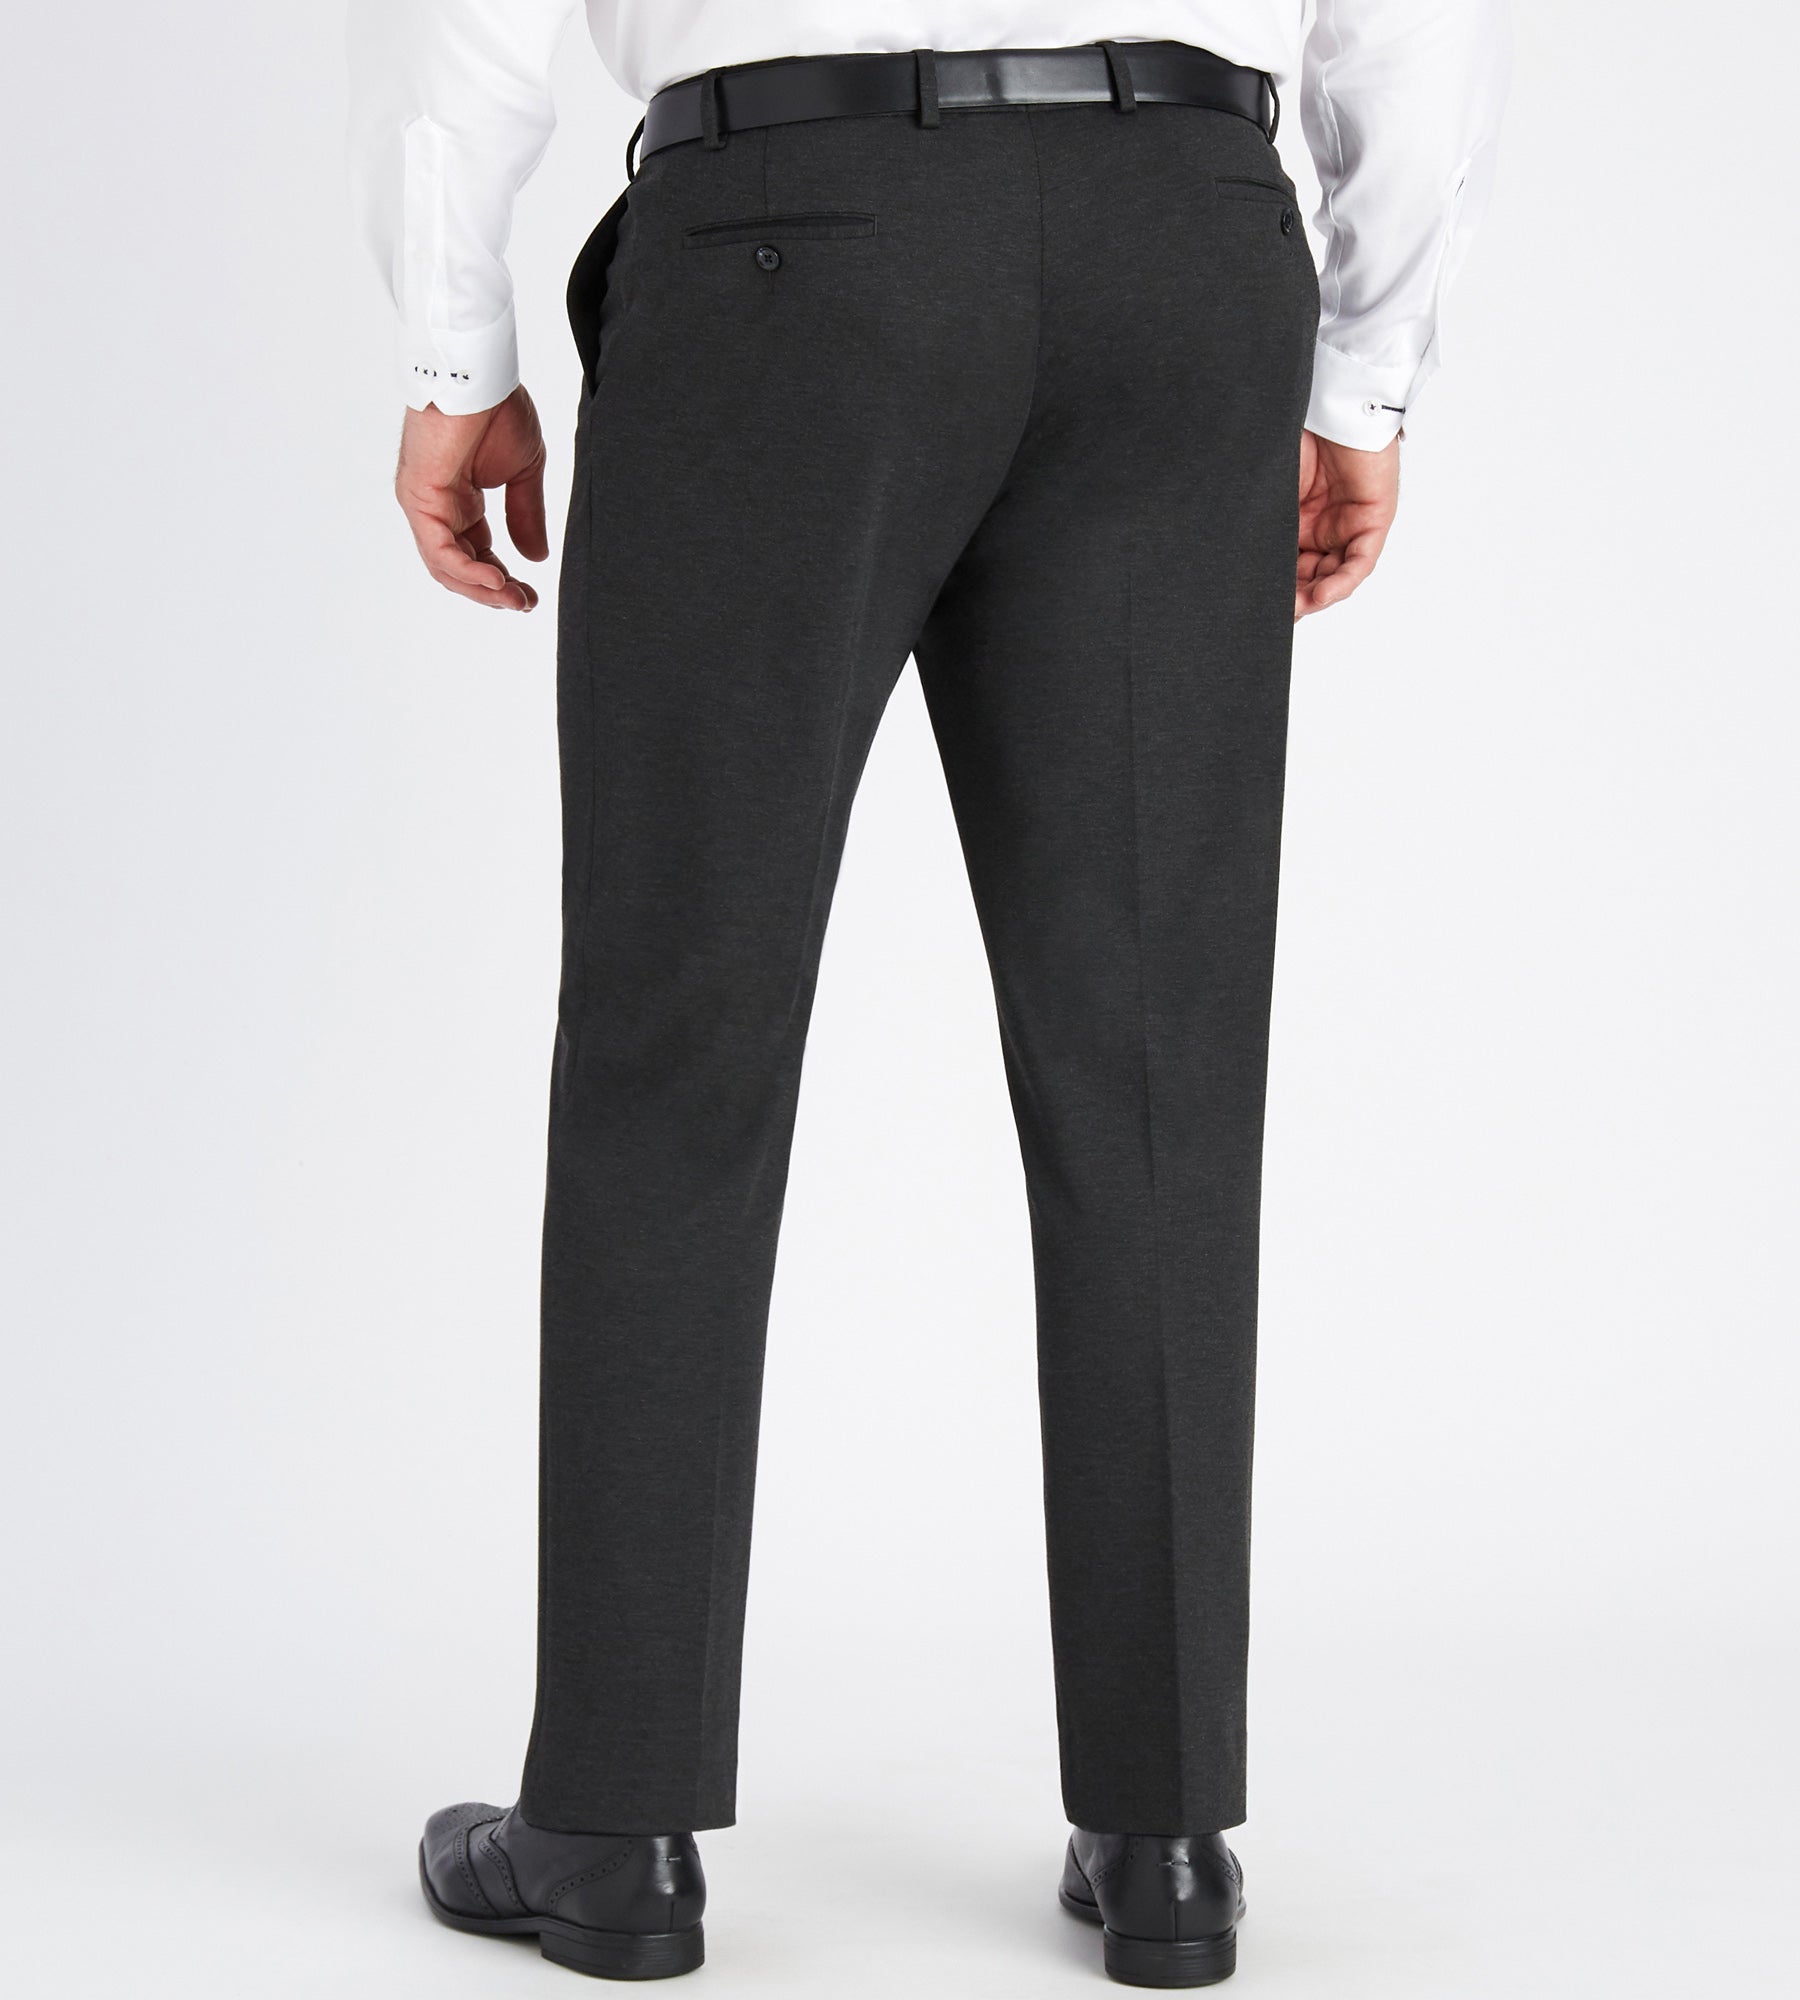 New Mens Plus Size Dress Pants Formal Casual Stretch Long Straight